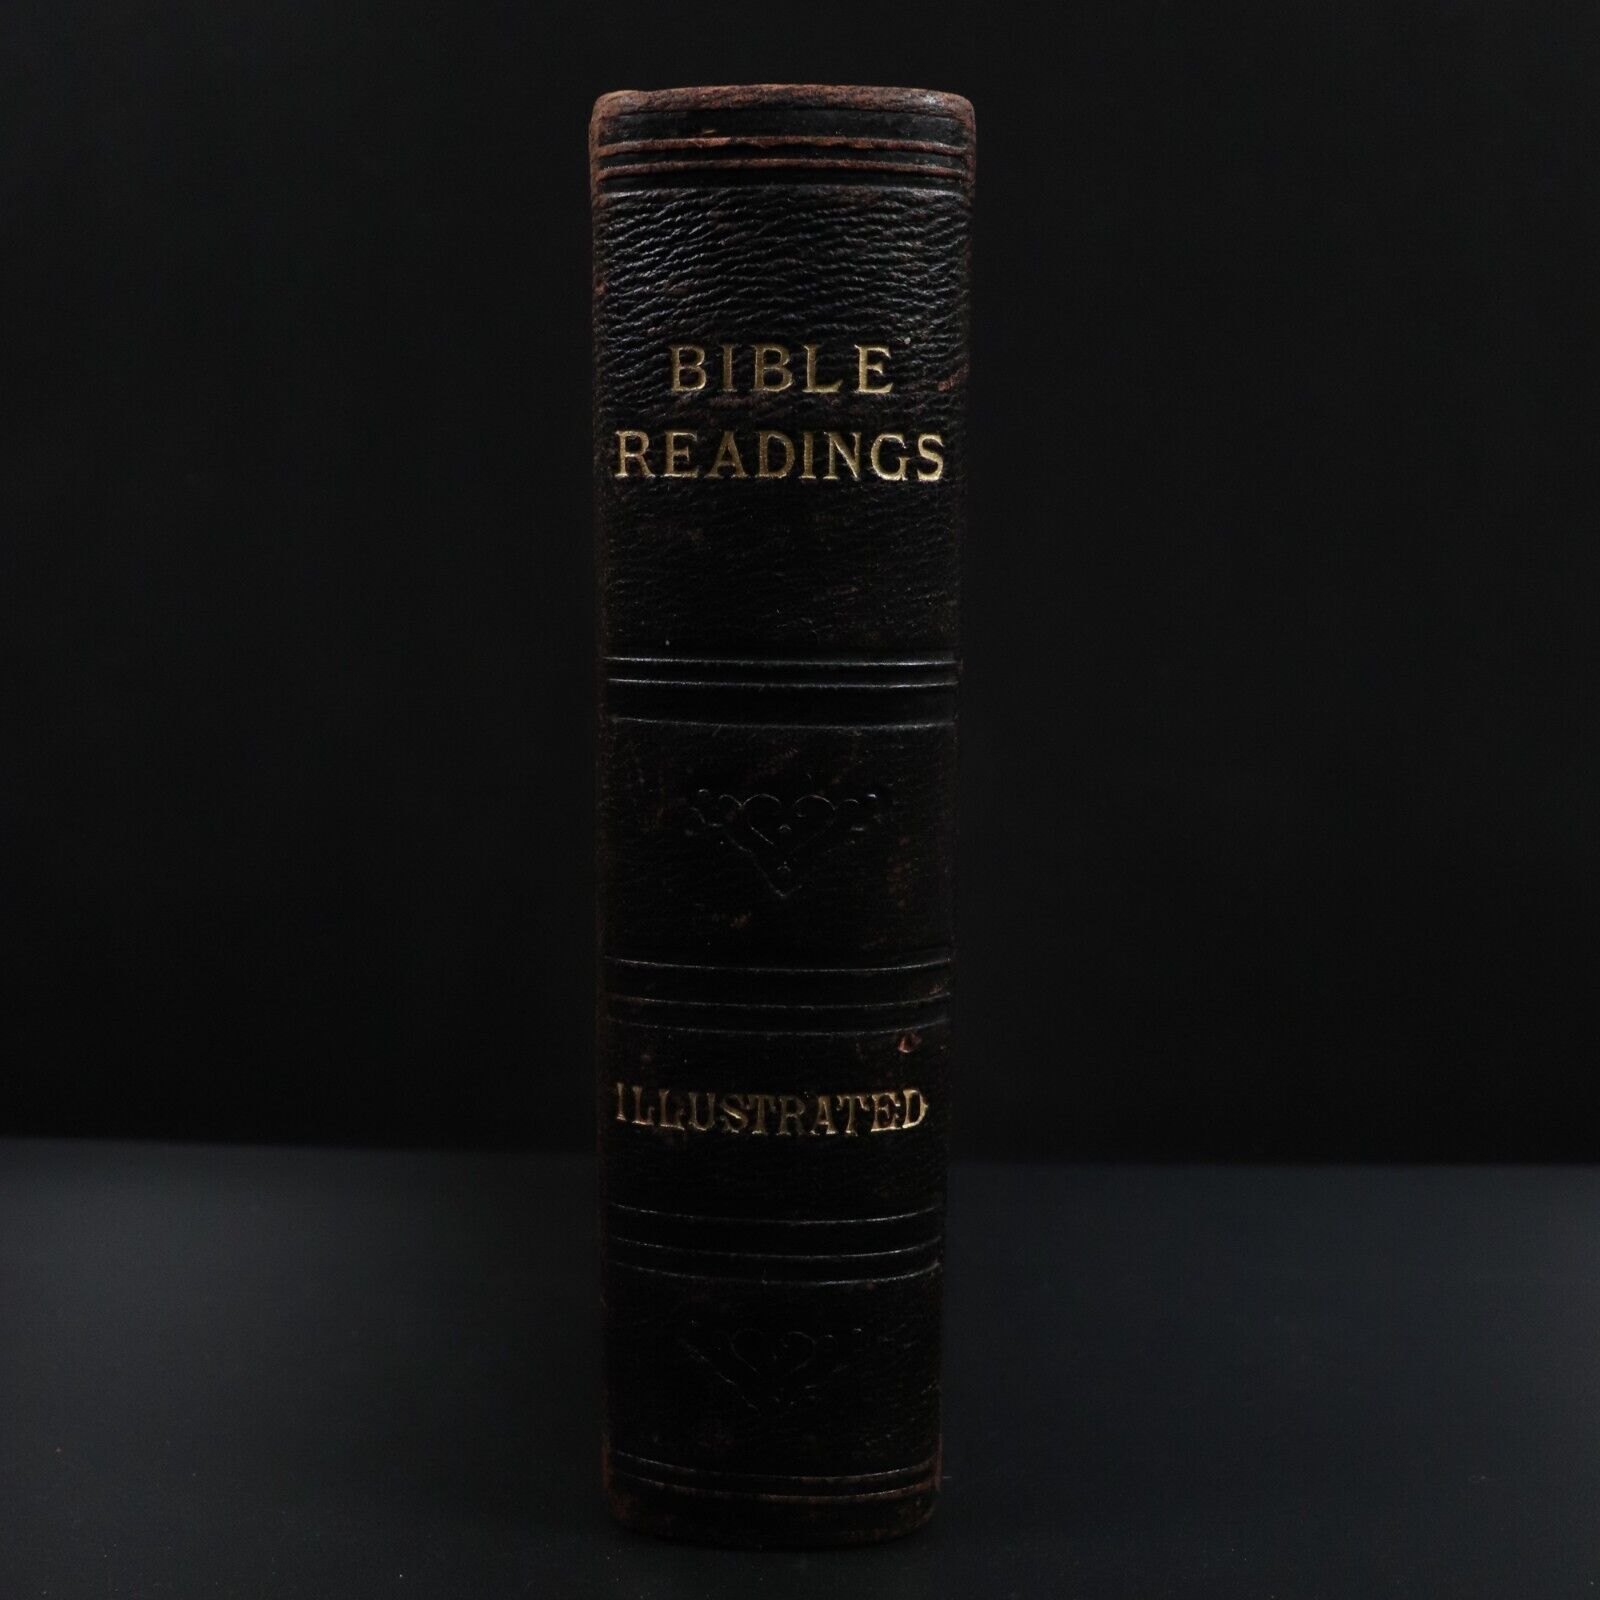 1915 Bible Readings For The Home Circle - Antique Religious Book Leather Binding